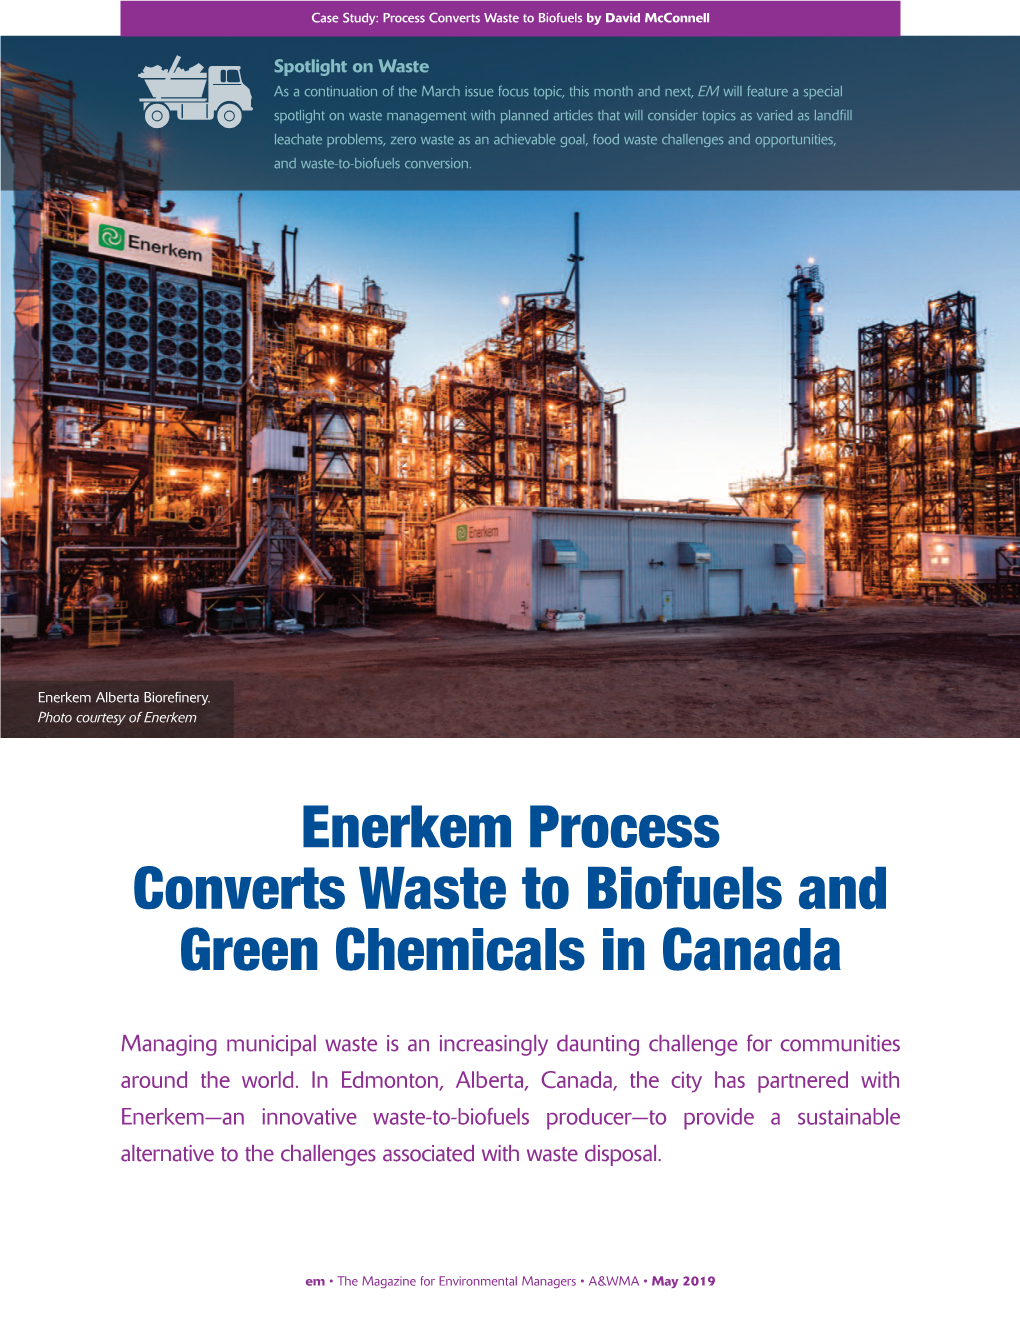 Enerkem Process Converts Waste to Biofuels and Green Chemicals in Canada